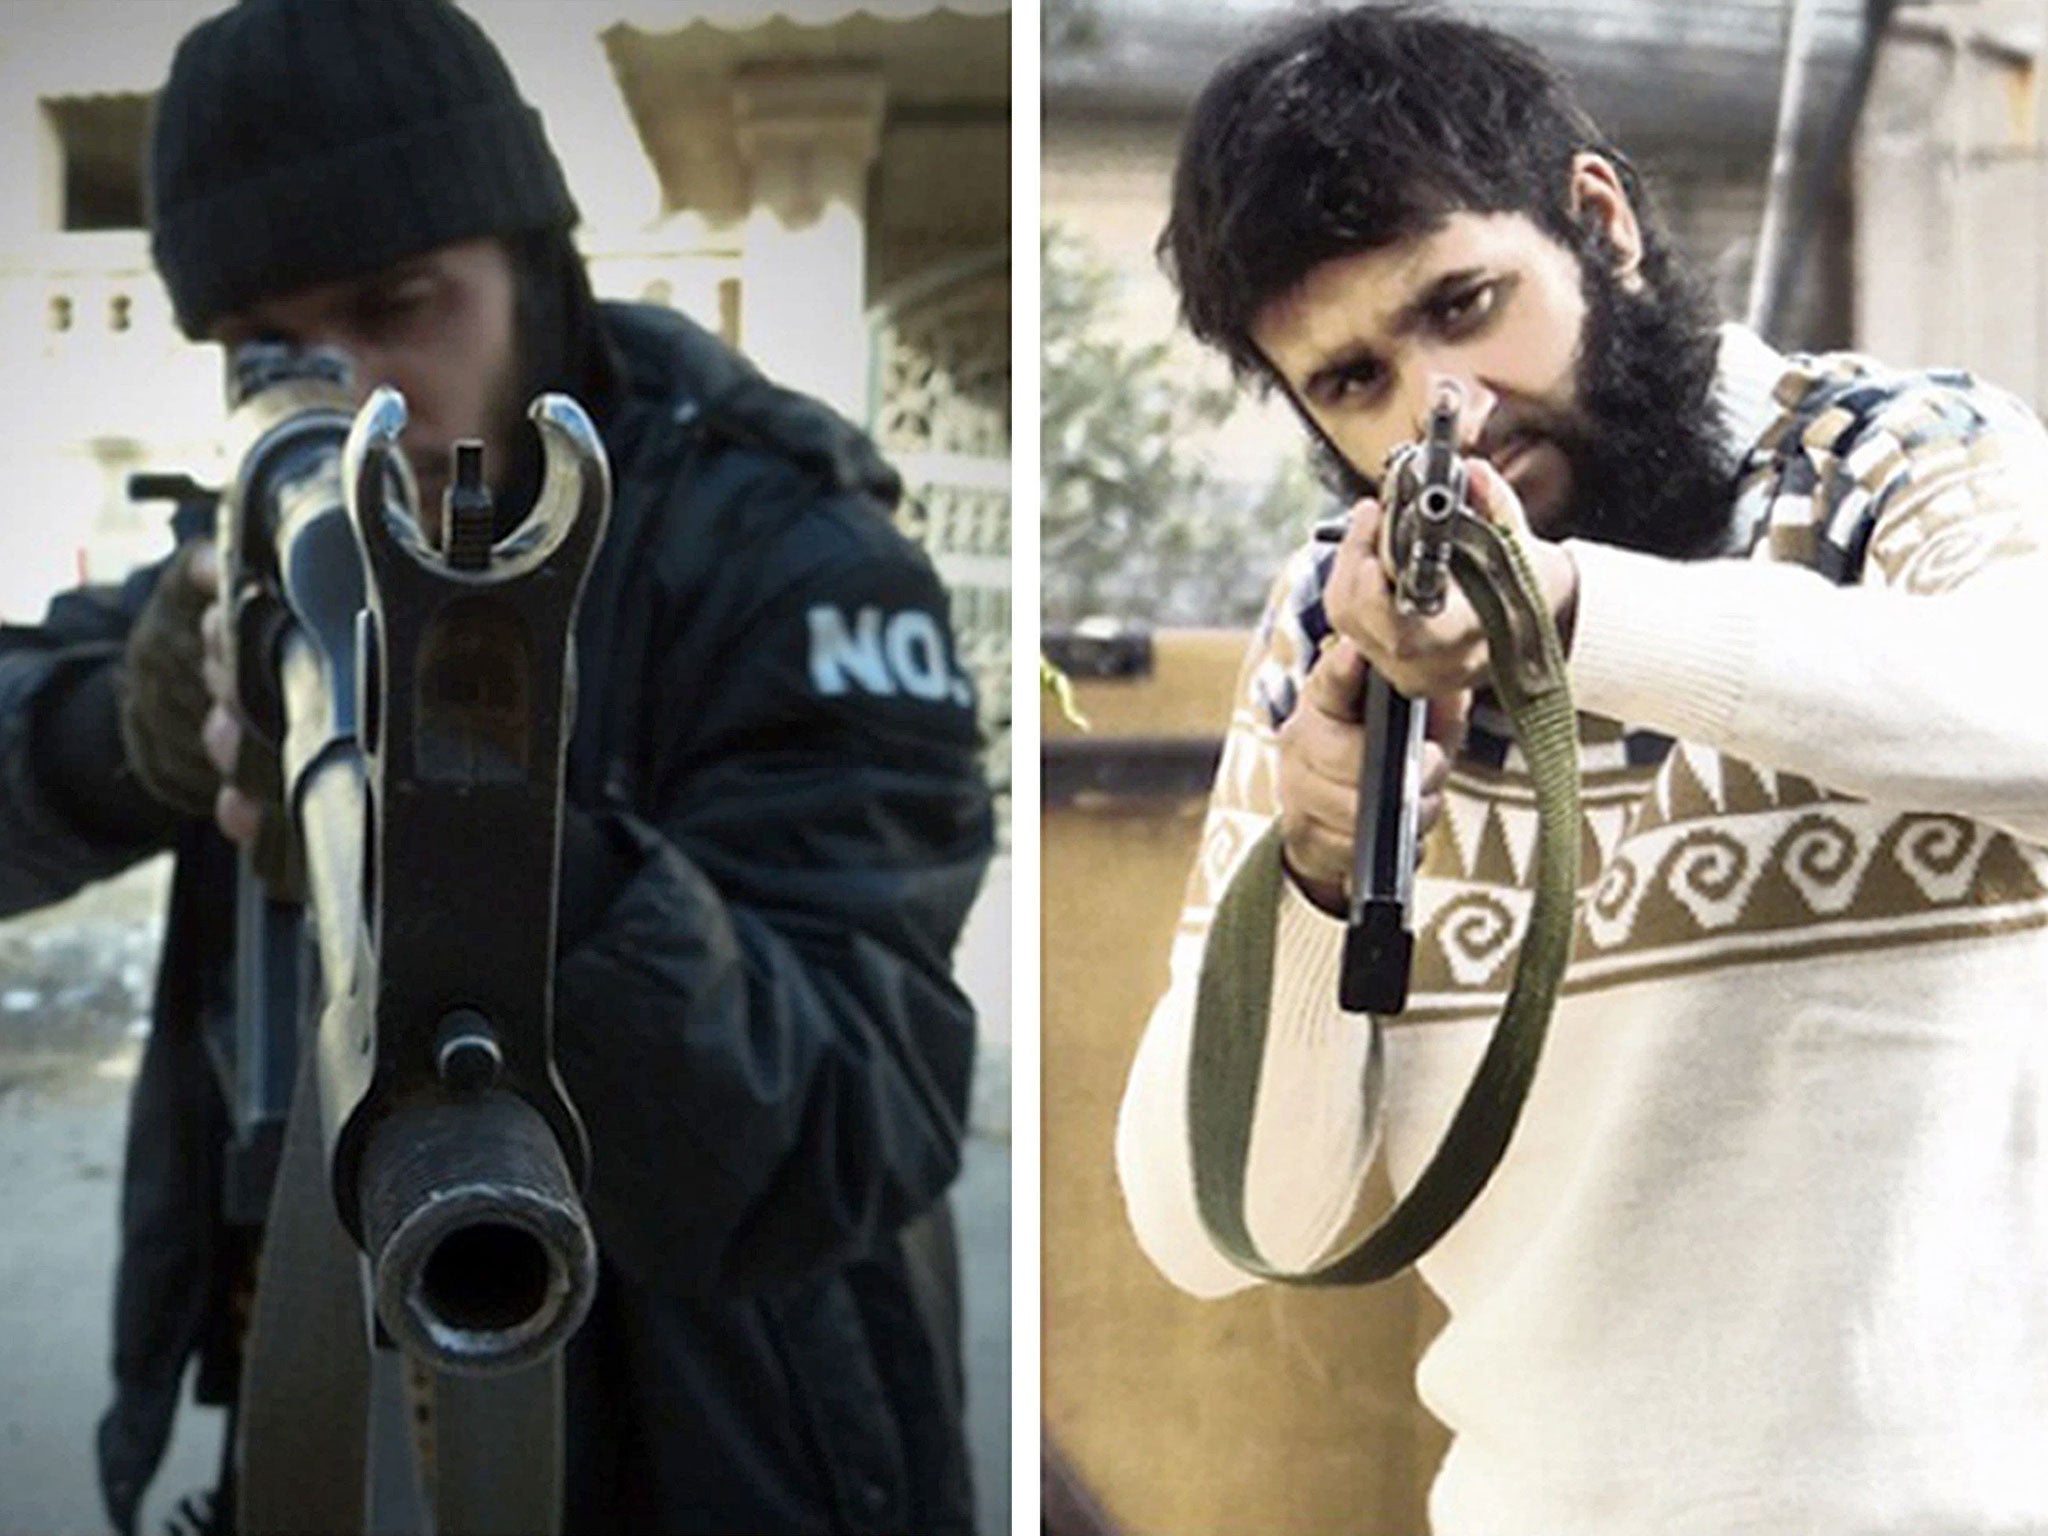 Mohammed Nahin Ahmed (left) and Yusuf Zubair Sarwar, both 22, who have admitted preparing to carry out terrorist acts after they travelled to Syria to join rebel fighters